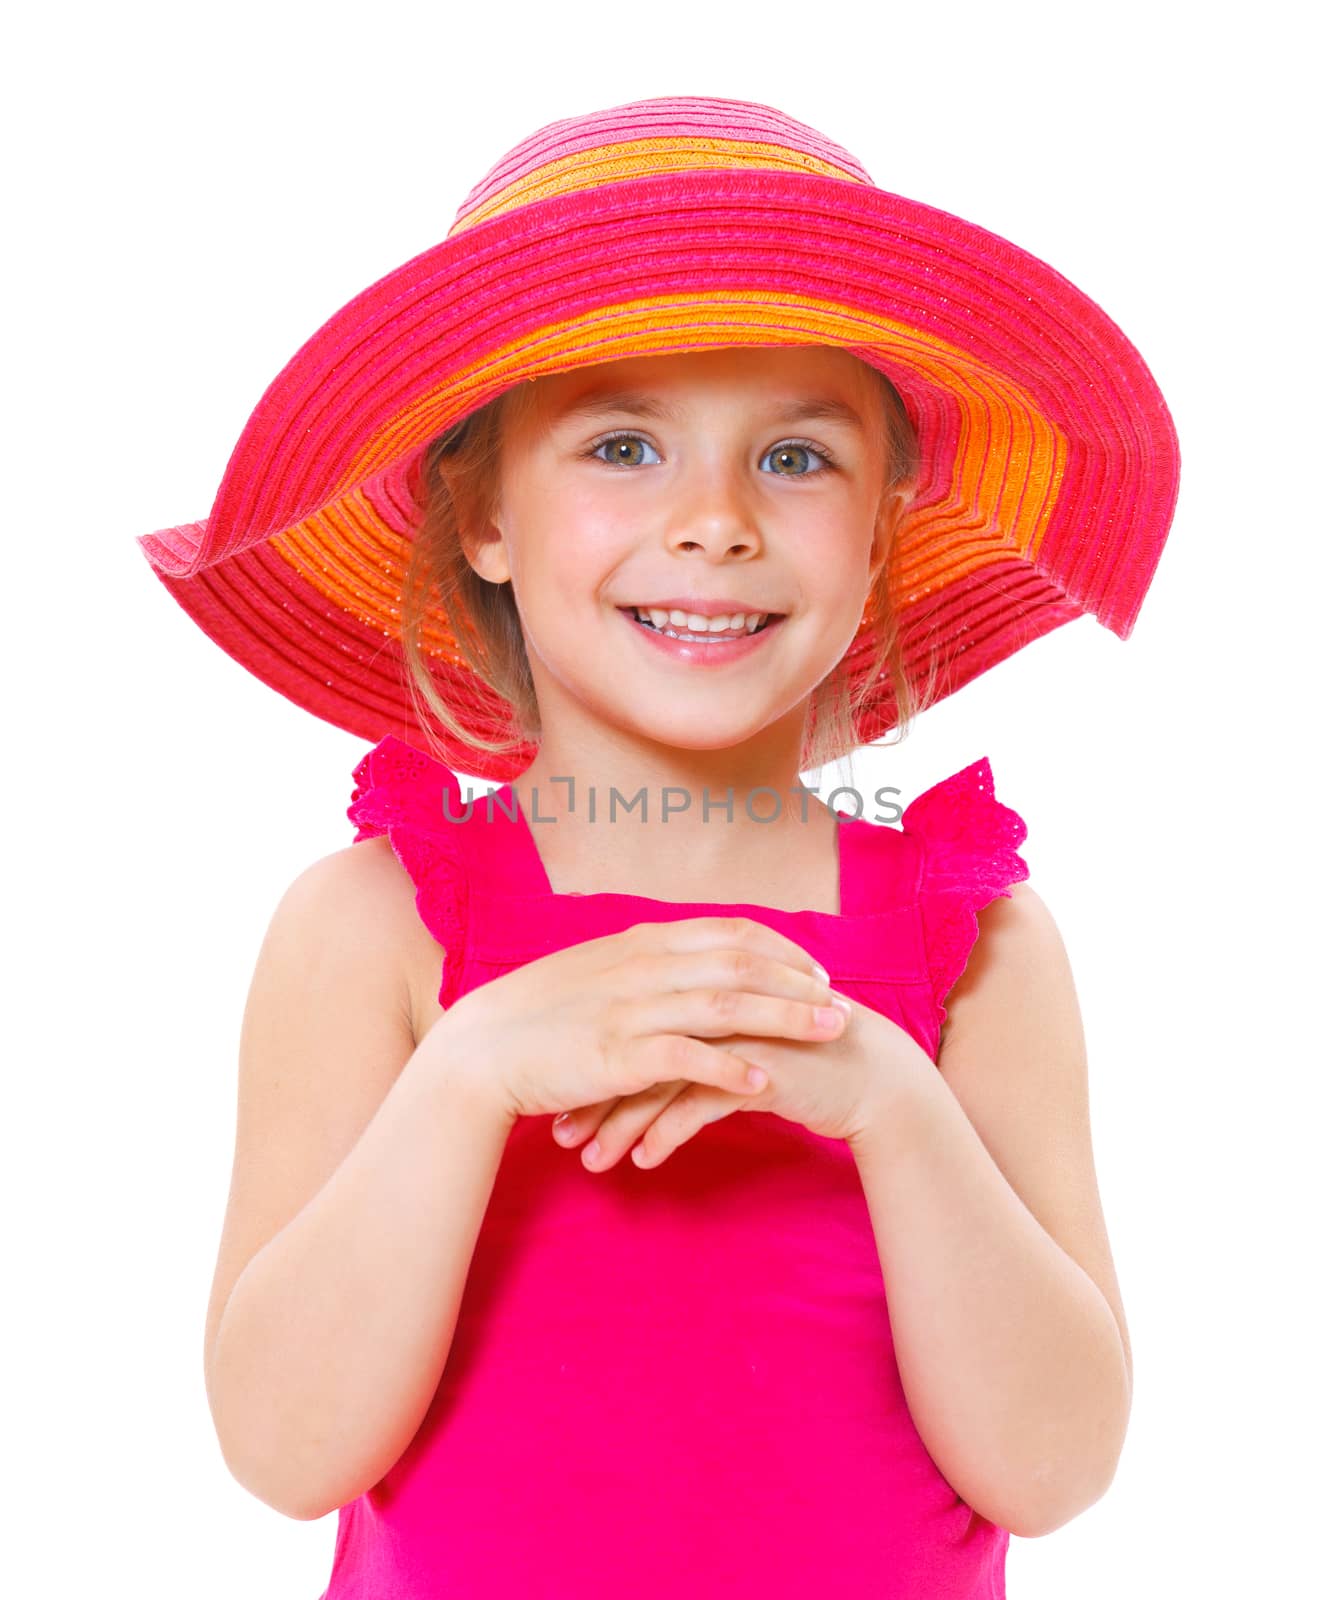 Cute little girl wearing a beach hat smiling isolated on a white background.